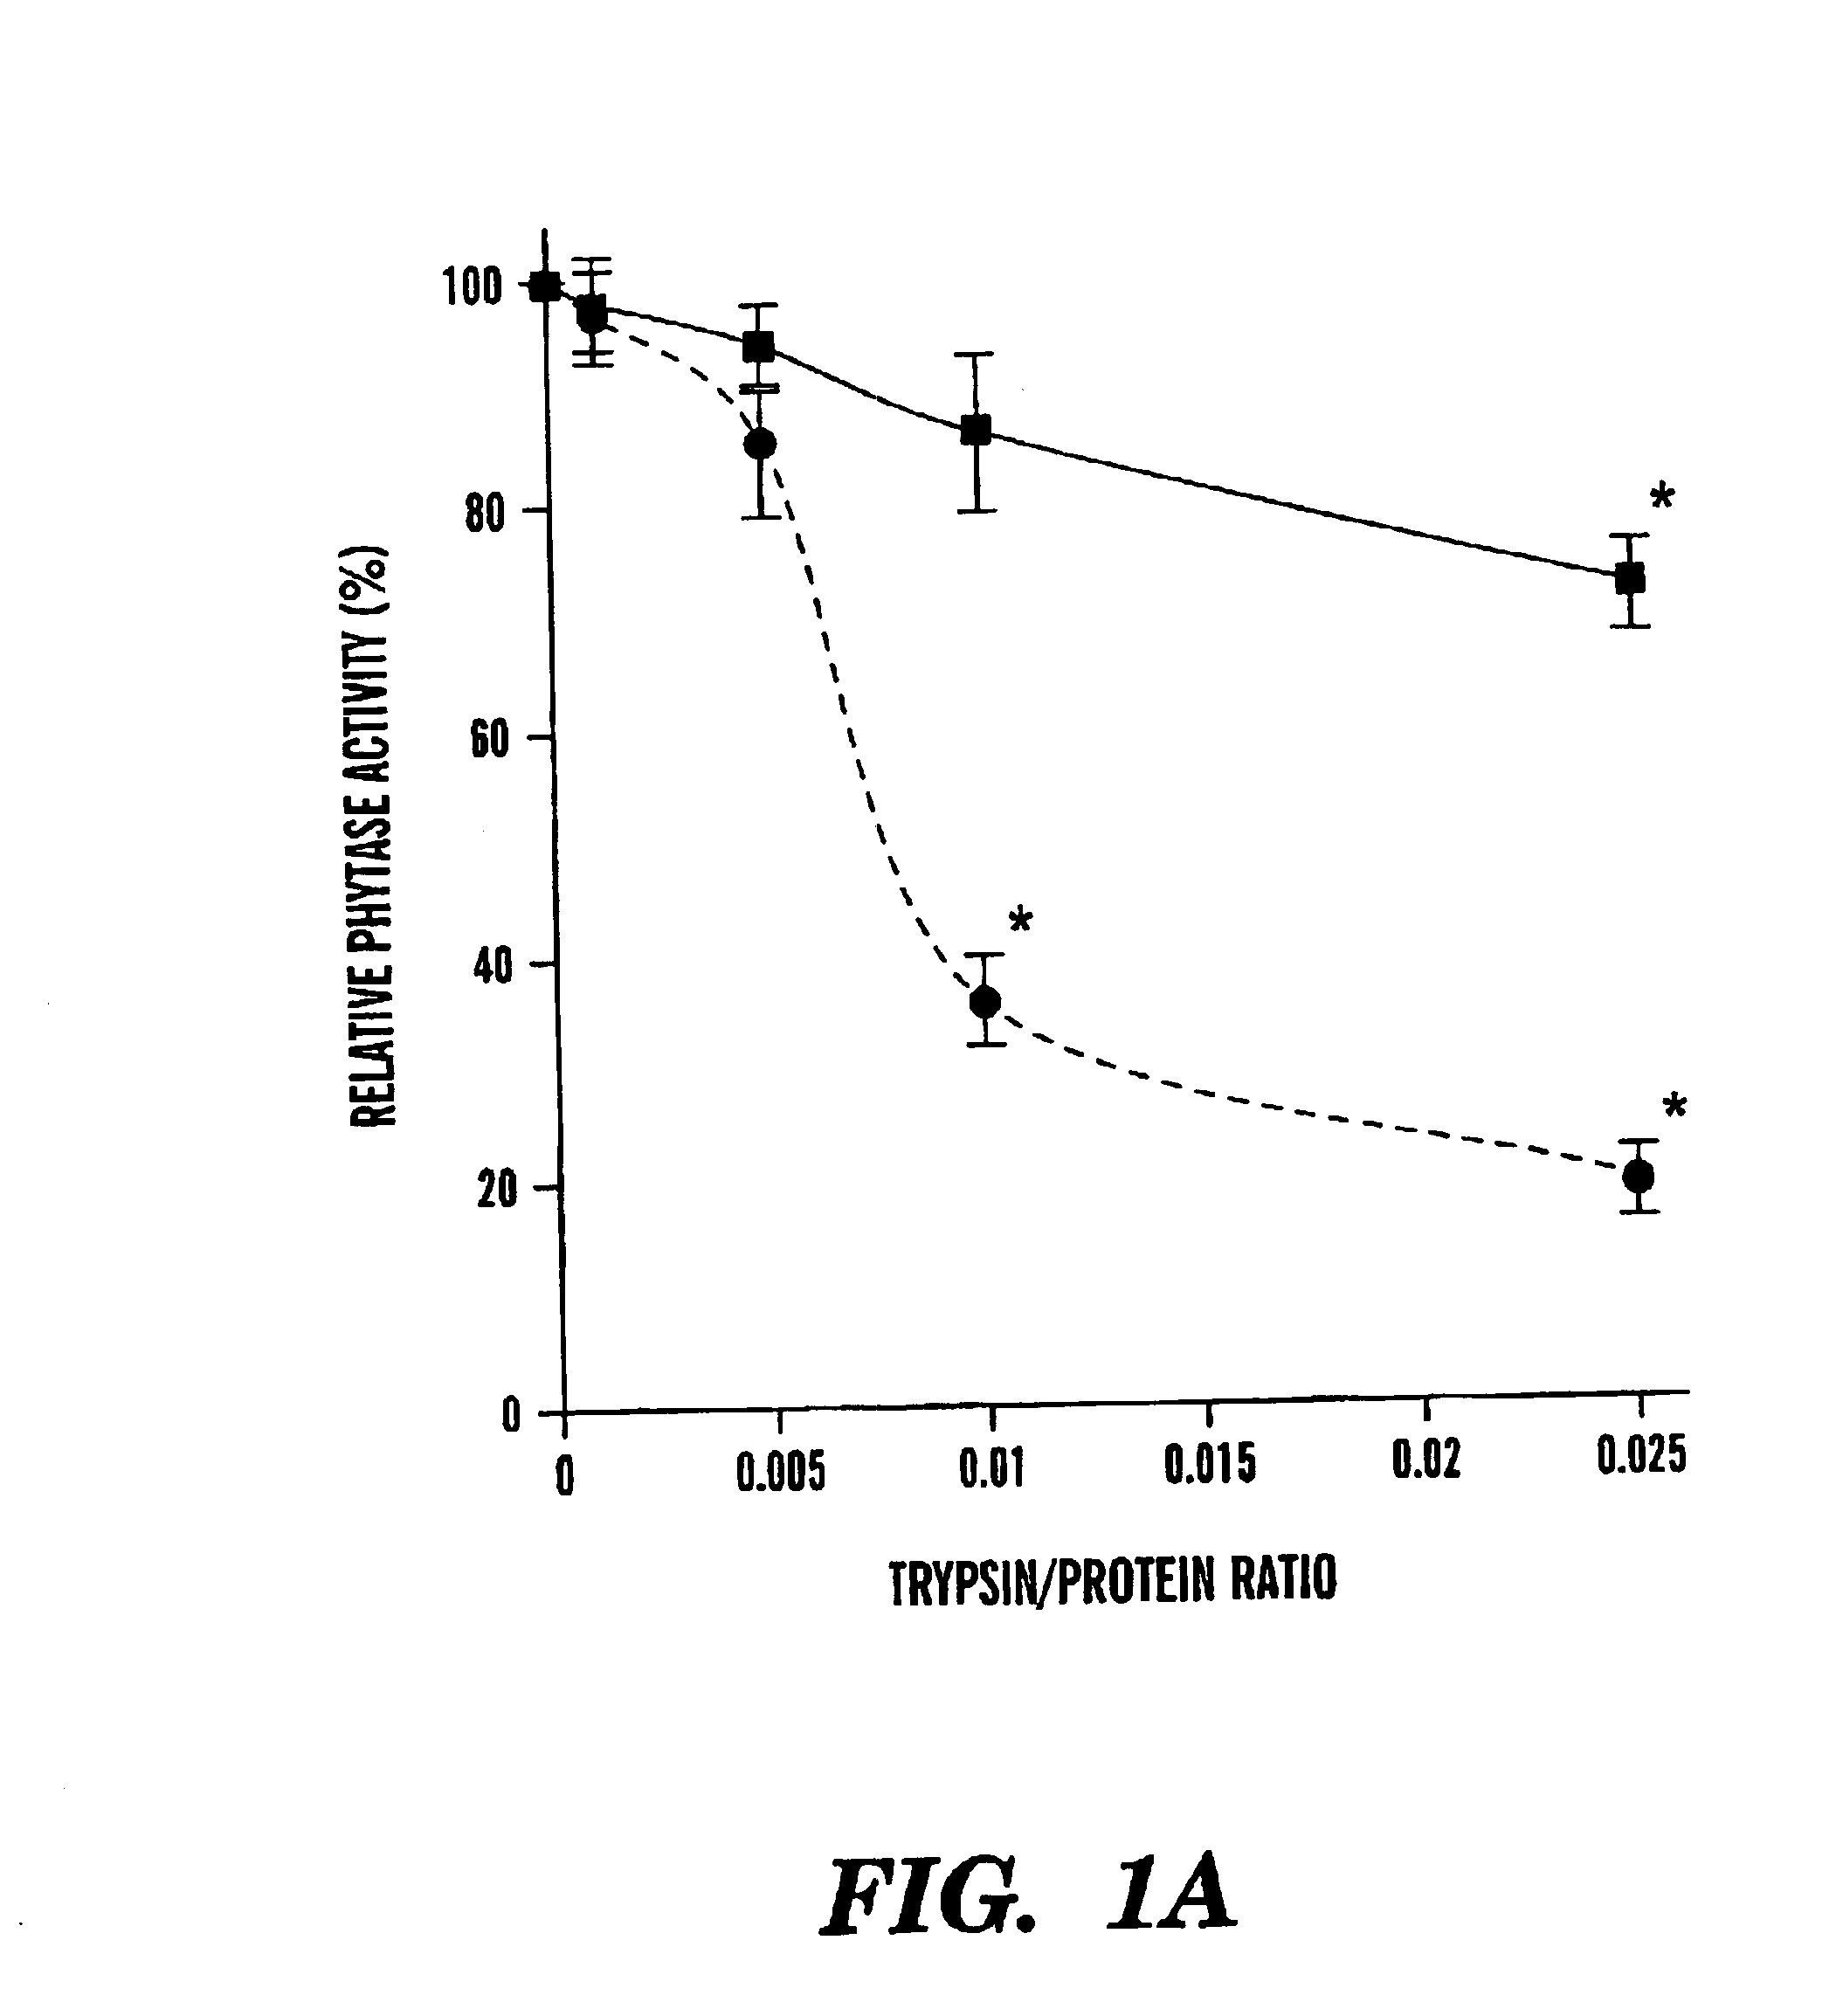 Phosphatases with improved phytase activity